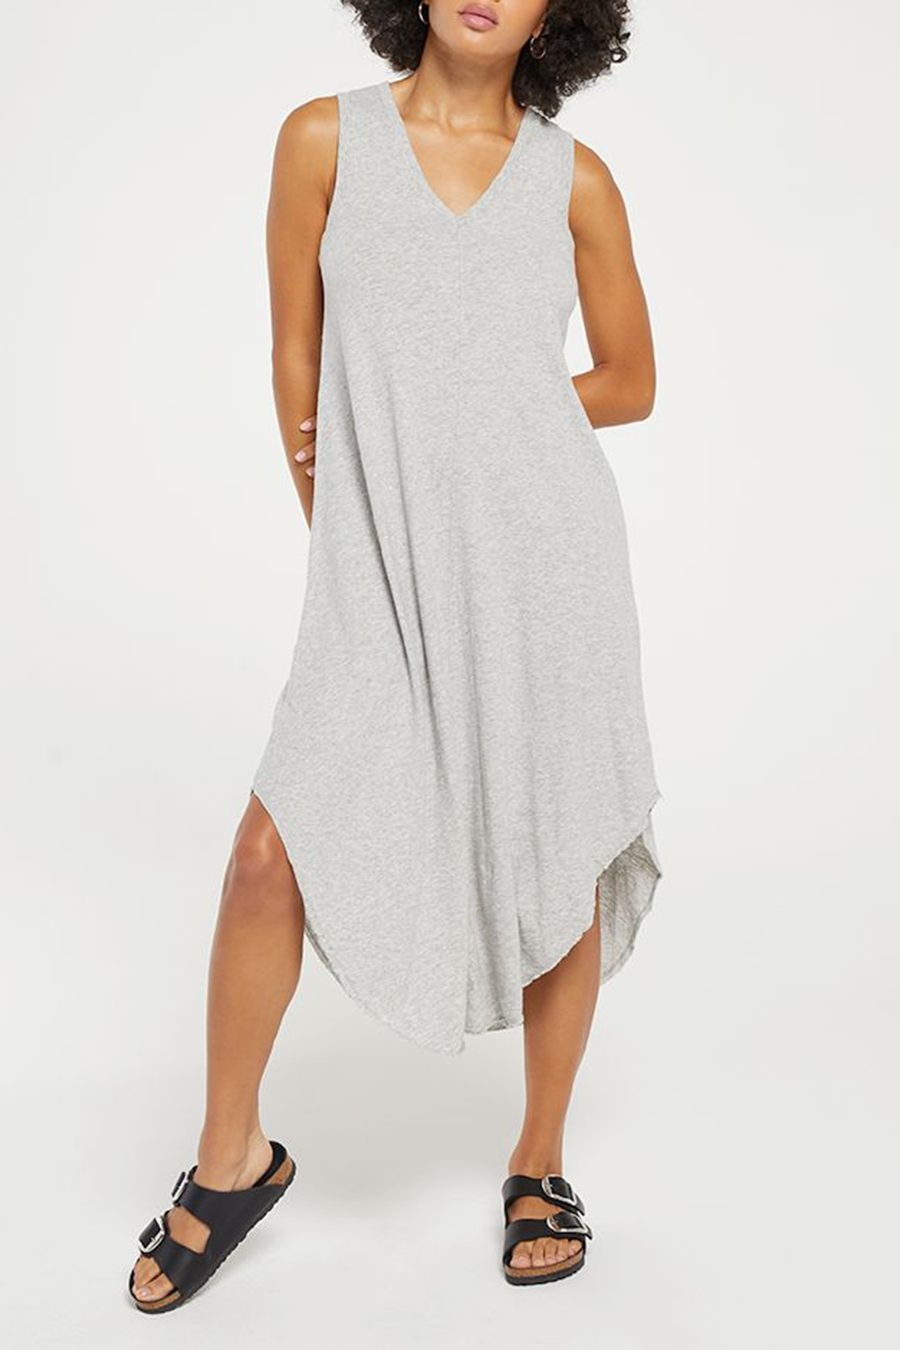 Reverie Dress | Heather Grey - Main Image Number 1 of 3